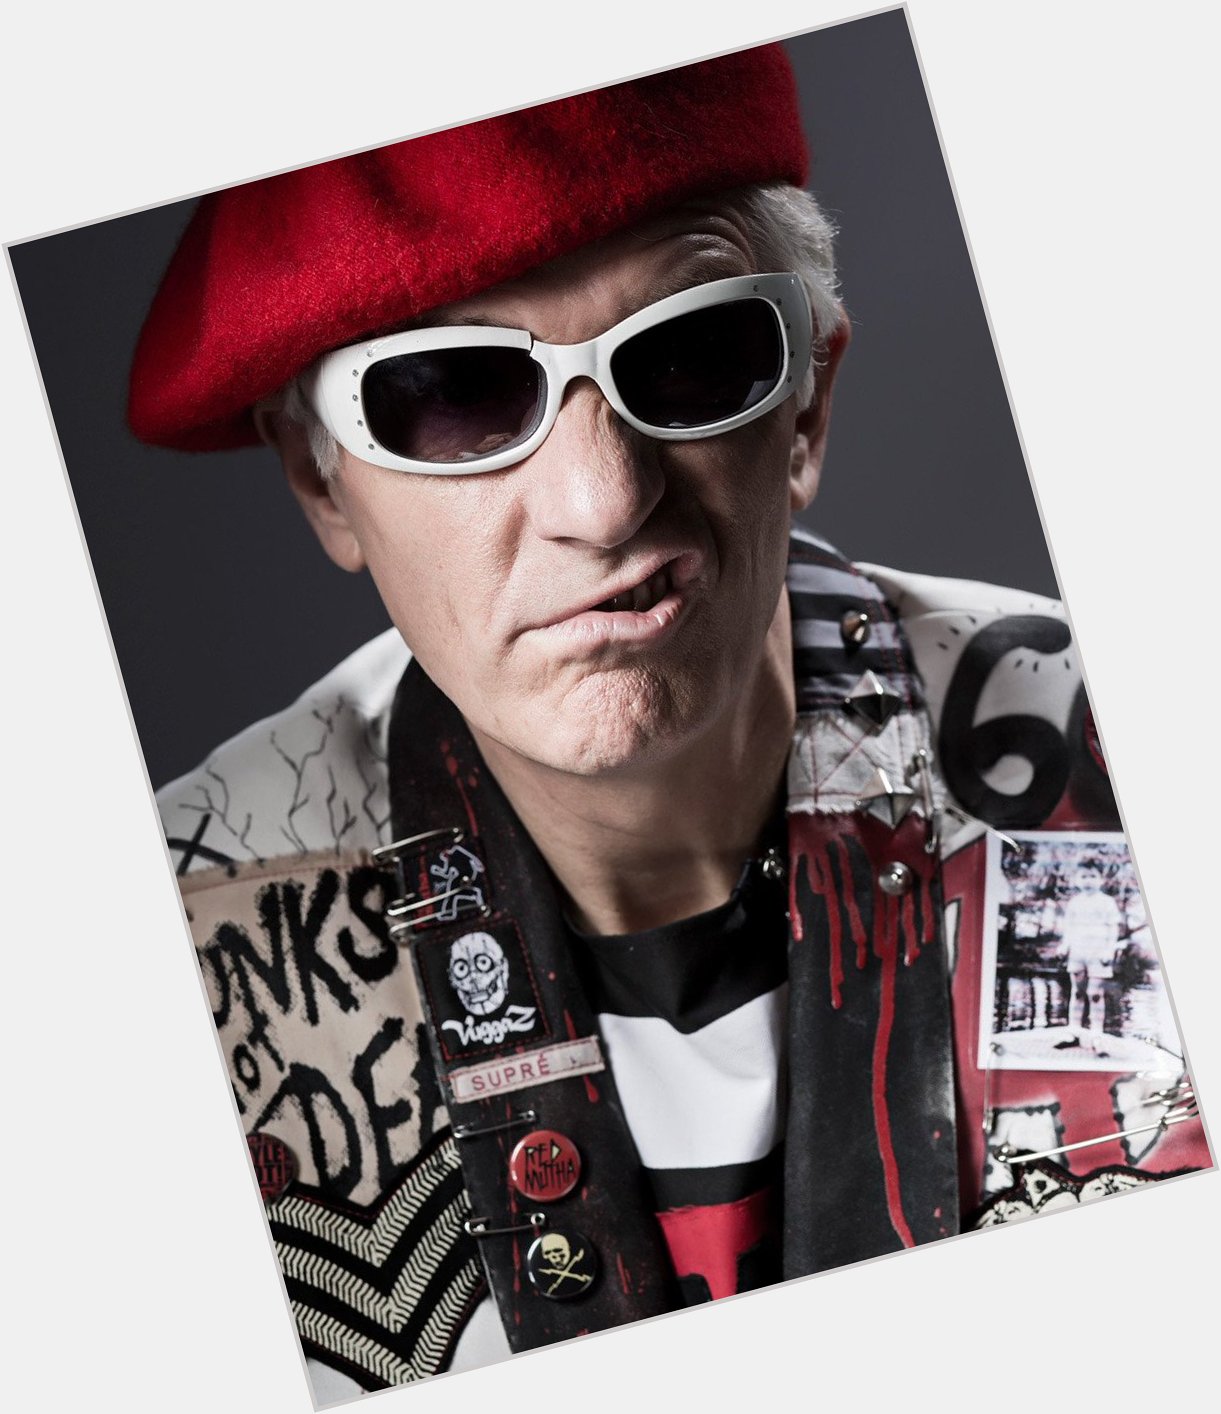 Happy birthday Captain Sensible of The Damned 